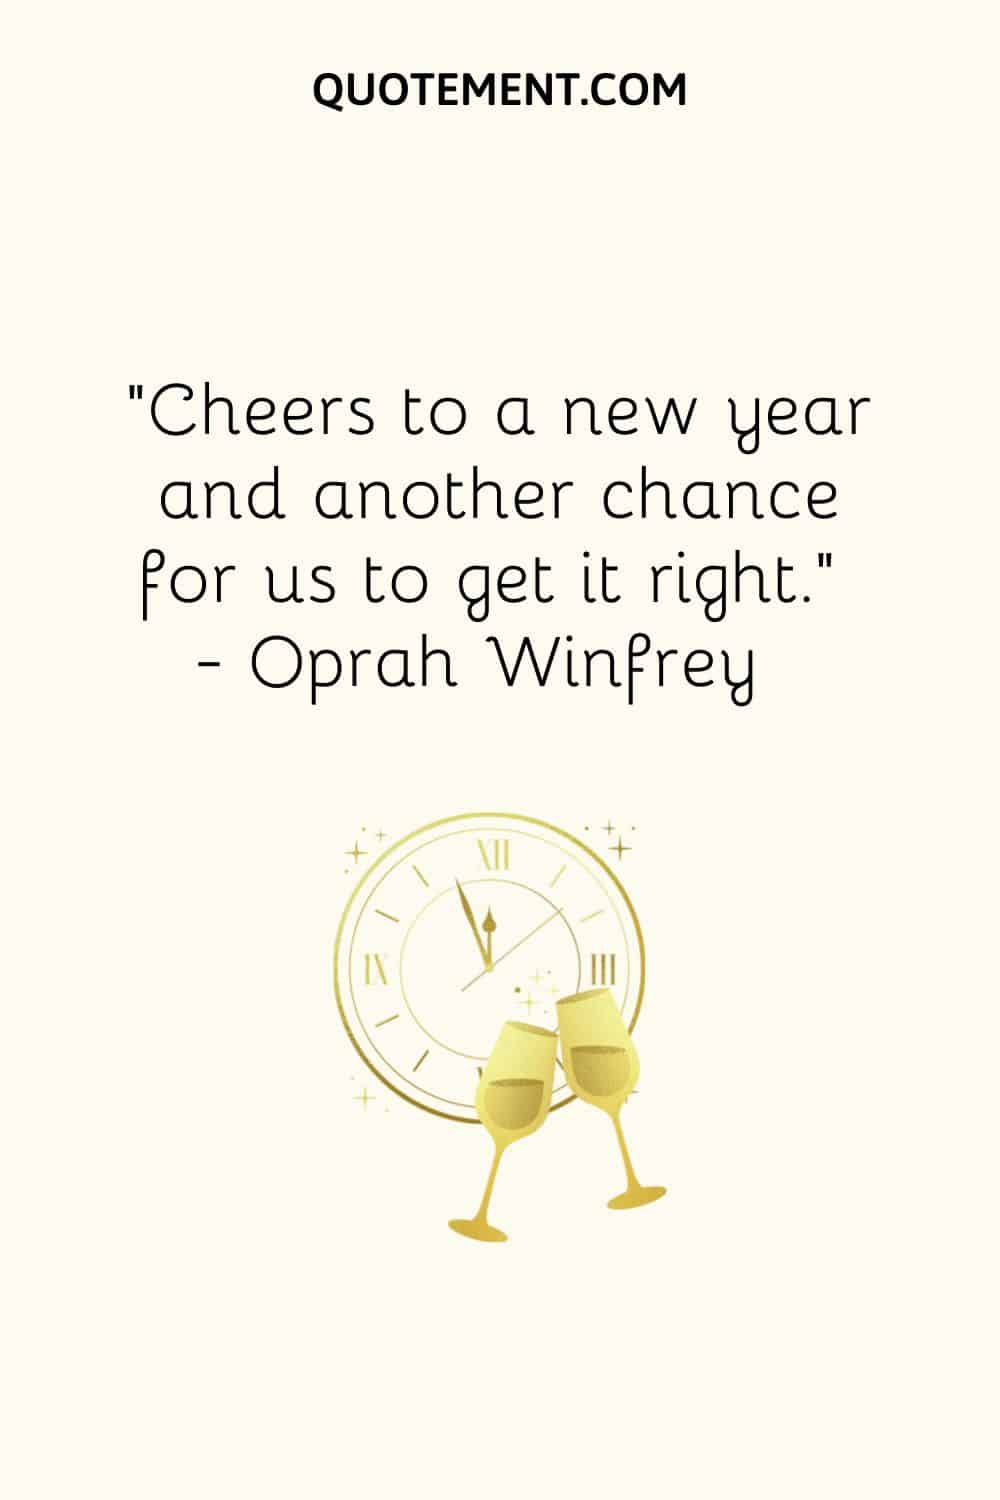 “Cheers to a new year and another chance for us to get it right.” ― Oprah Winfrey